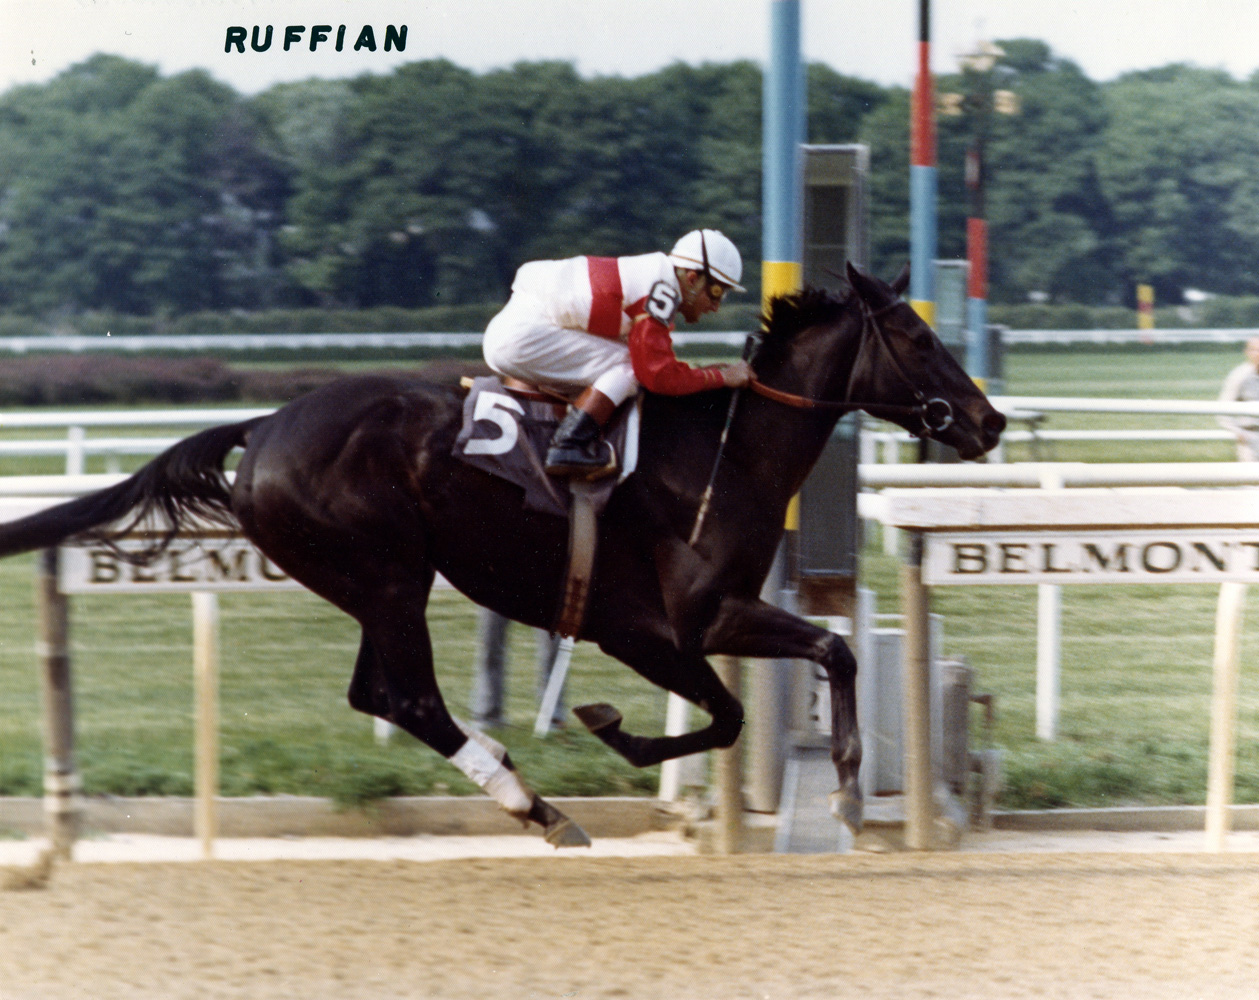 Ruffian (Jacinto Vasquez up) winning the 1975 Coaching Club American Oaks at Belmont Park (NYRA/Museum Collection)